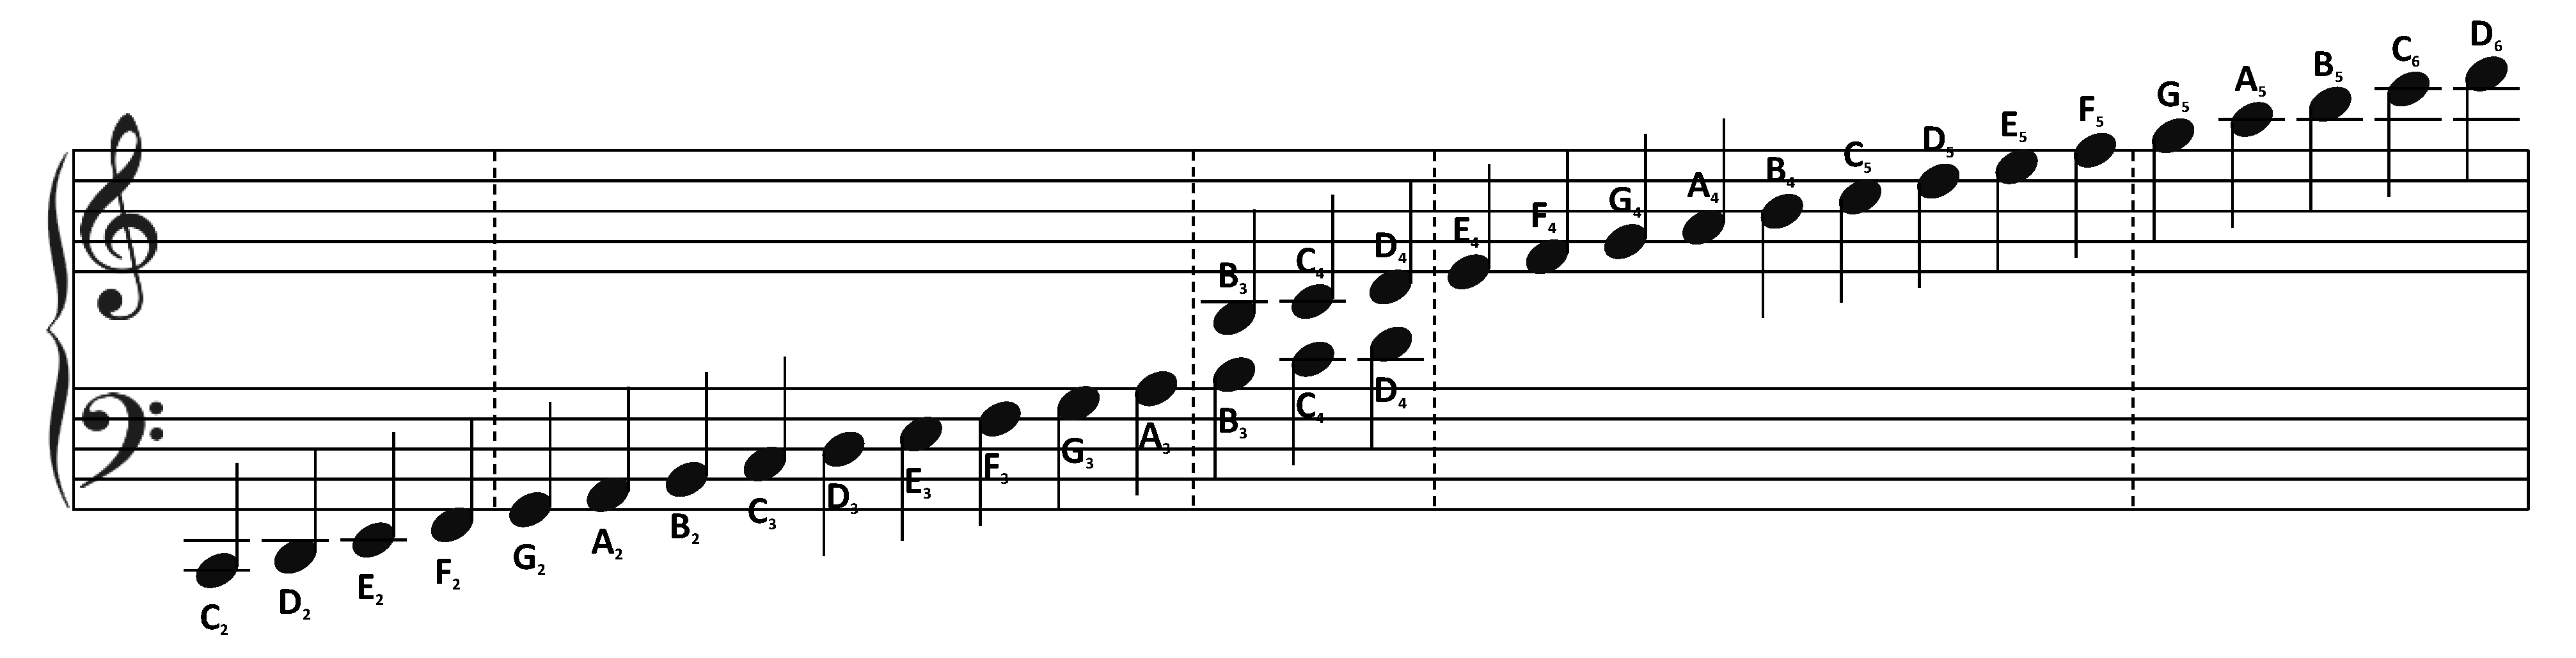 Reading Music Notes Image